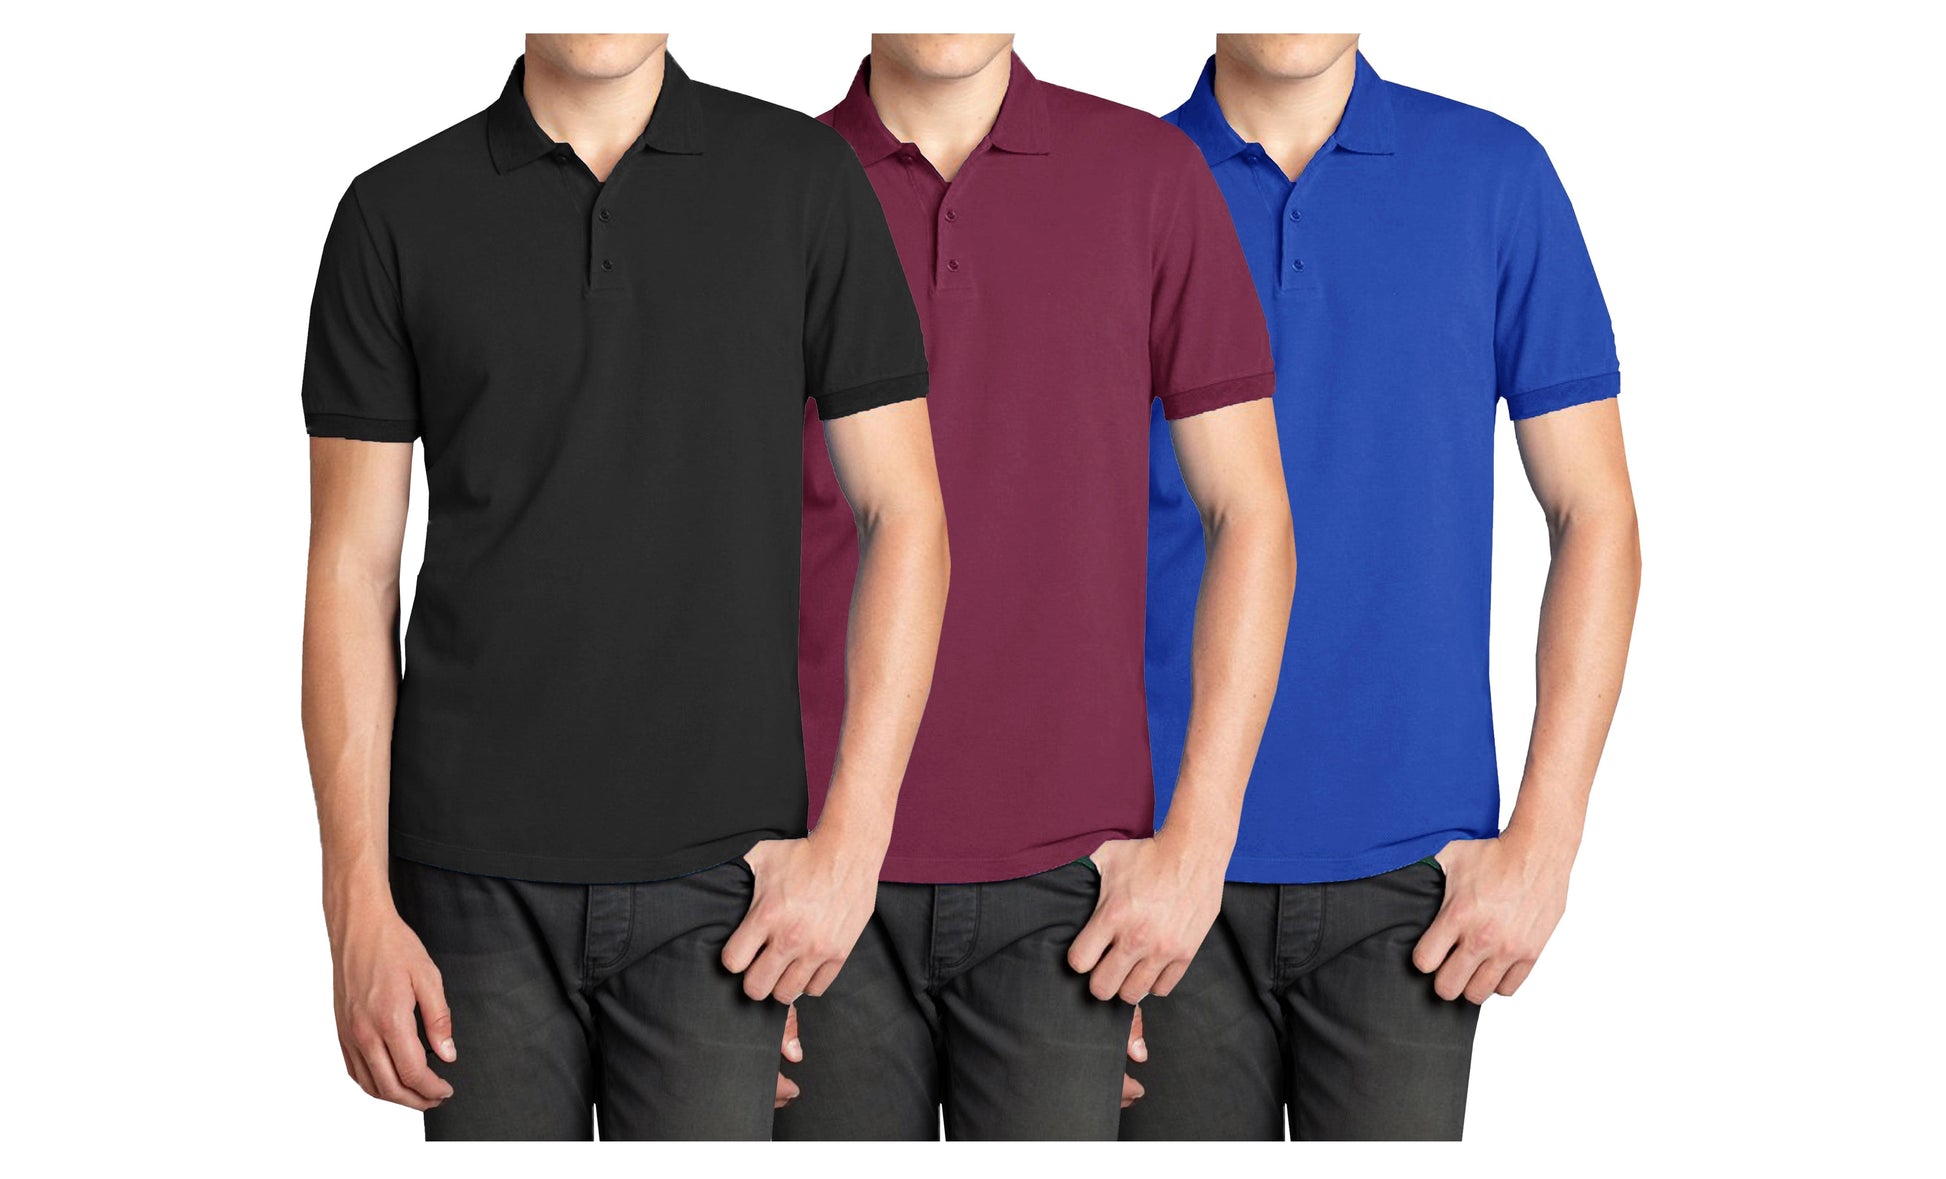 Men's (3-PACK) Short Sleeve Pique Polo Shirt (S-2X) - GalaxybyHarvic